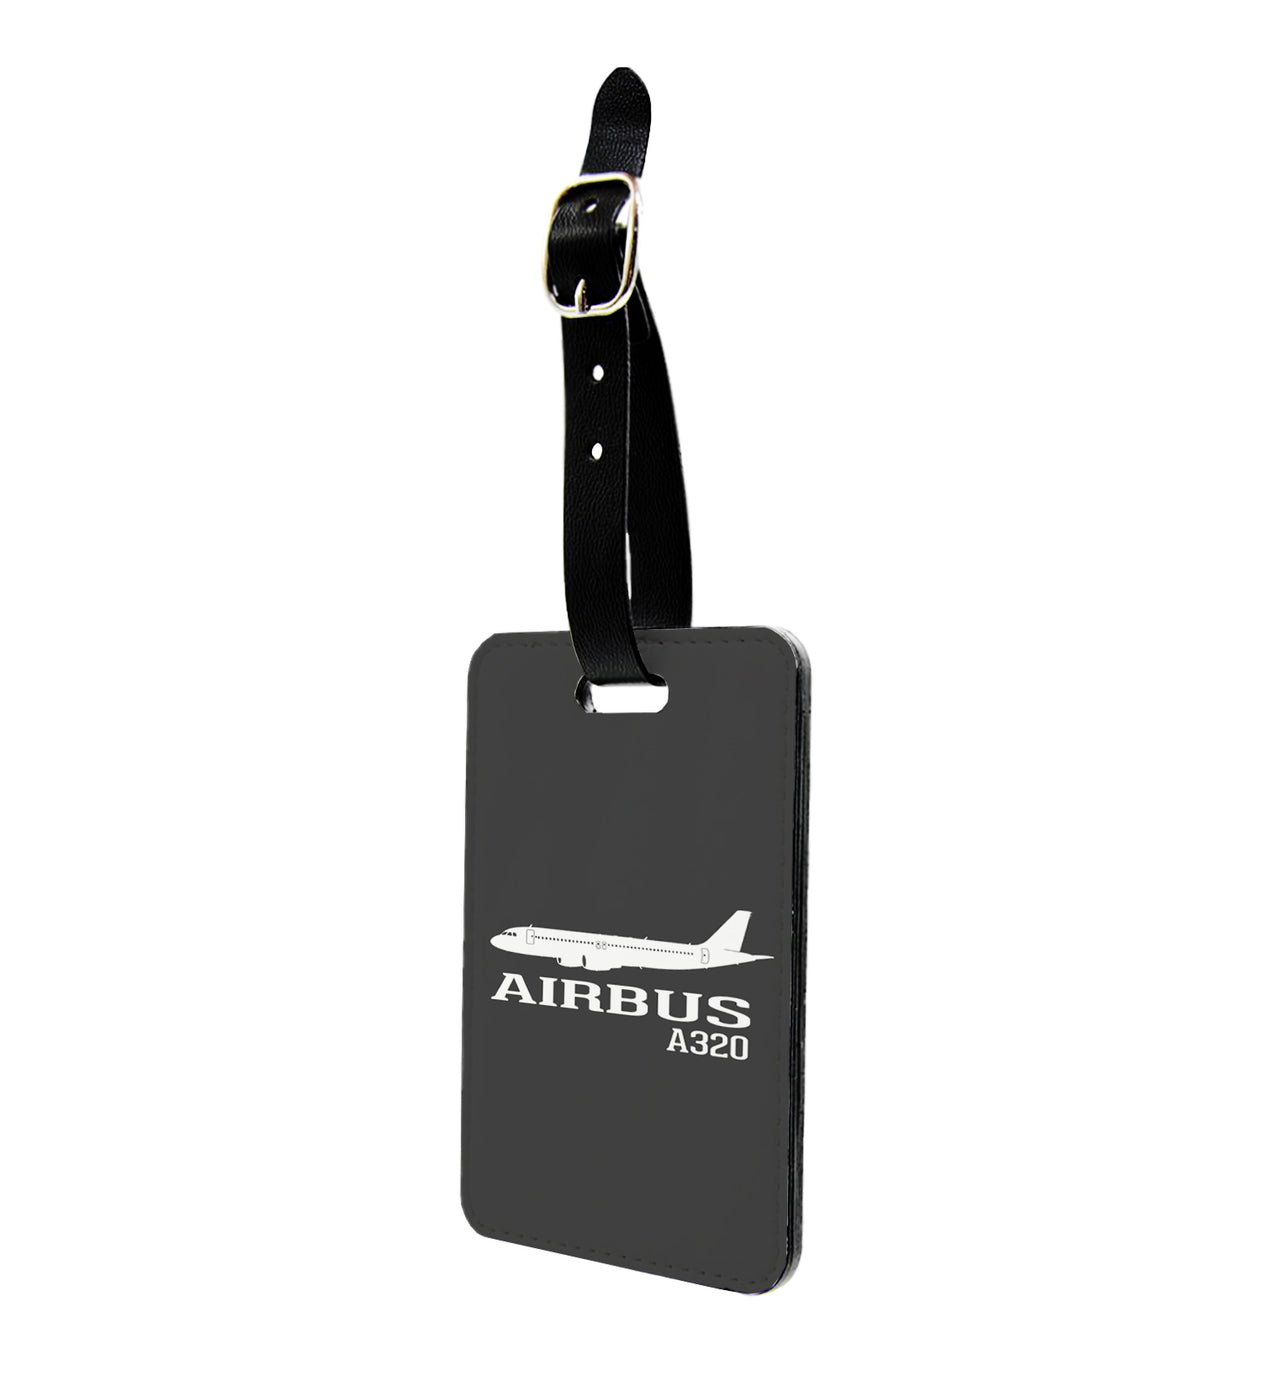 Airbus A320 Printed Designed Luggage Tag